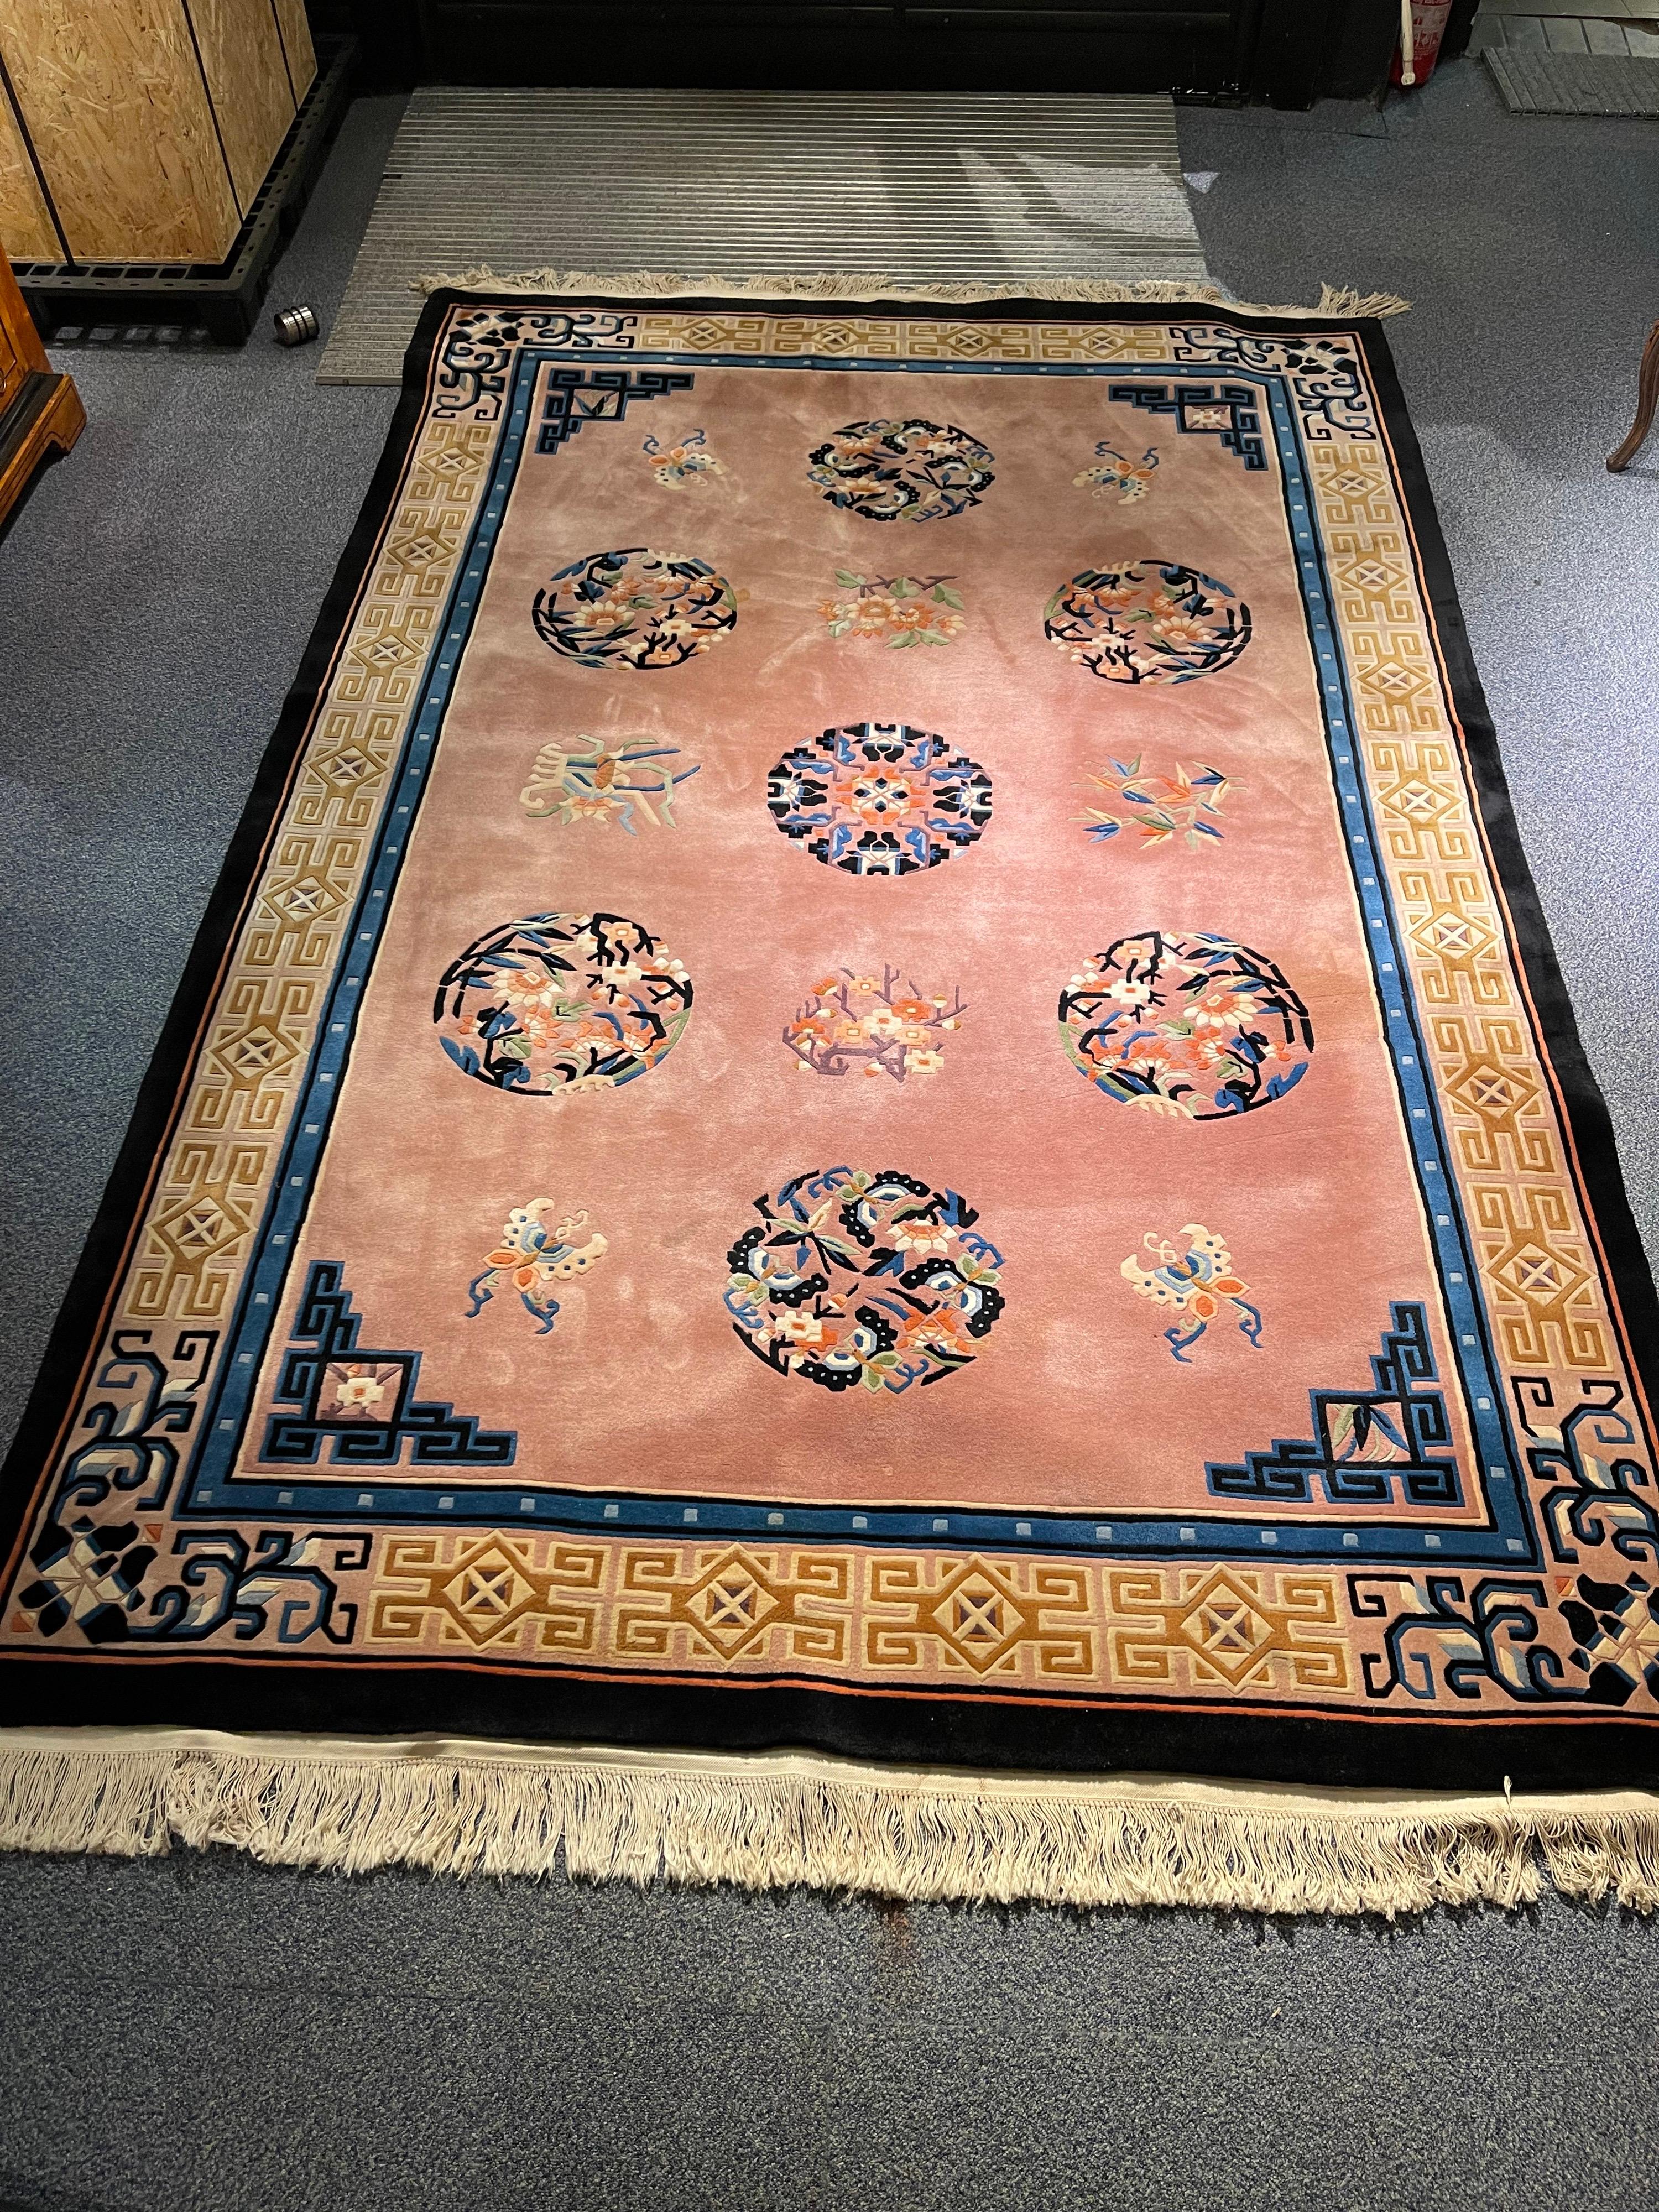 Beautiful China/Asia salon carpet. Late 20th Century

Extremely high quality Asia carpet, finely knotted and colored cork wool.

Supple cork wool of excellent quality.
Background color is a salmon-colored tone.
Typical geometrically arranged